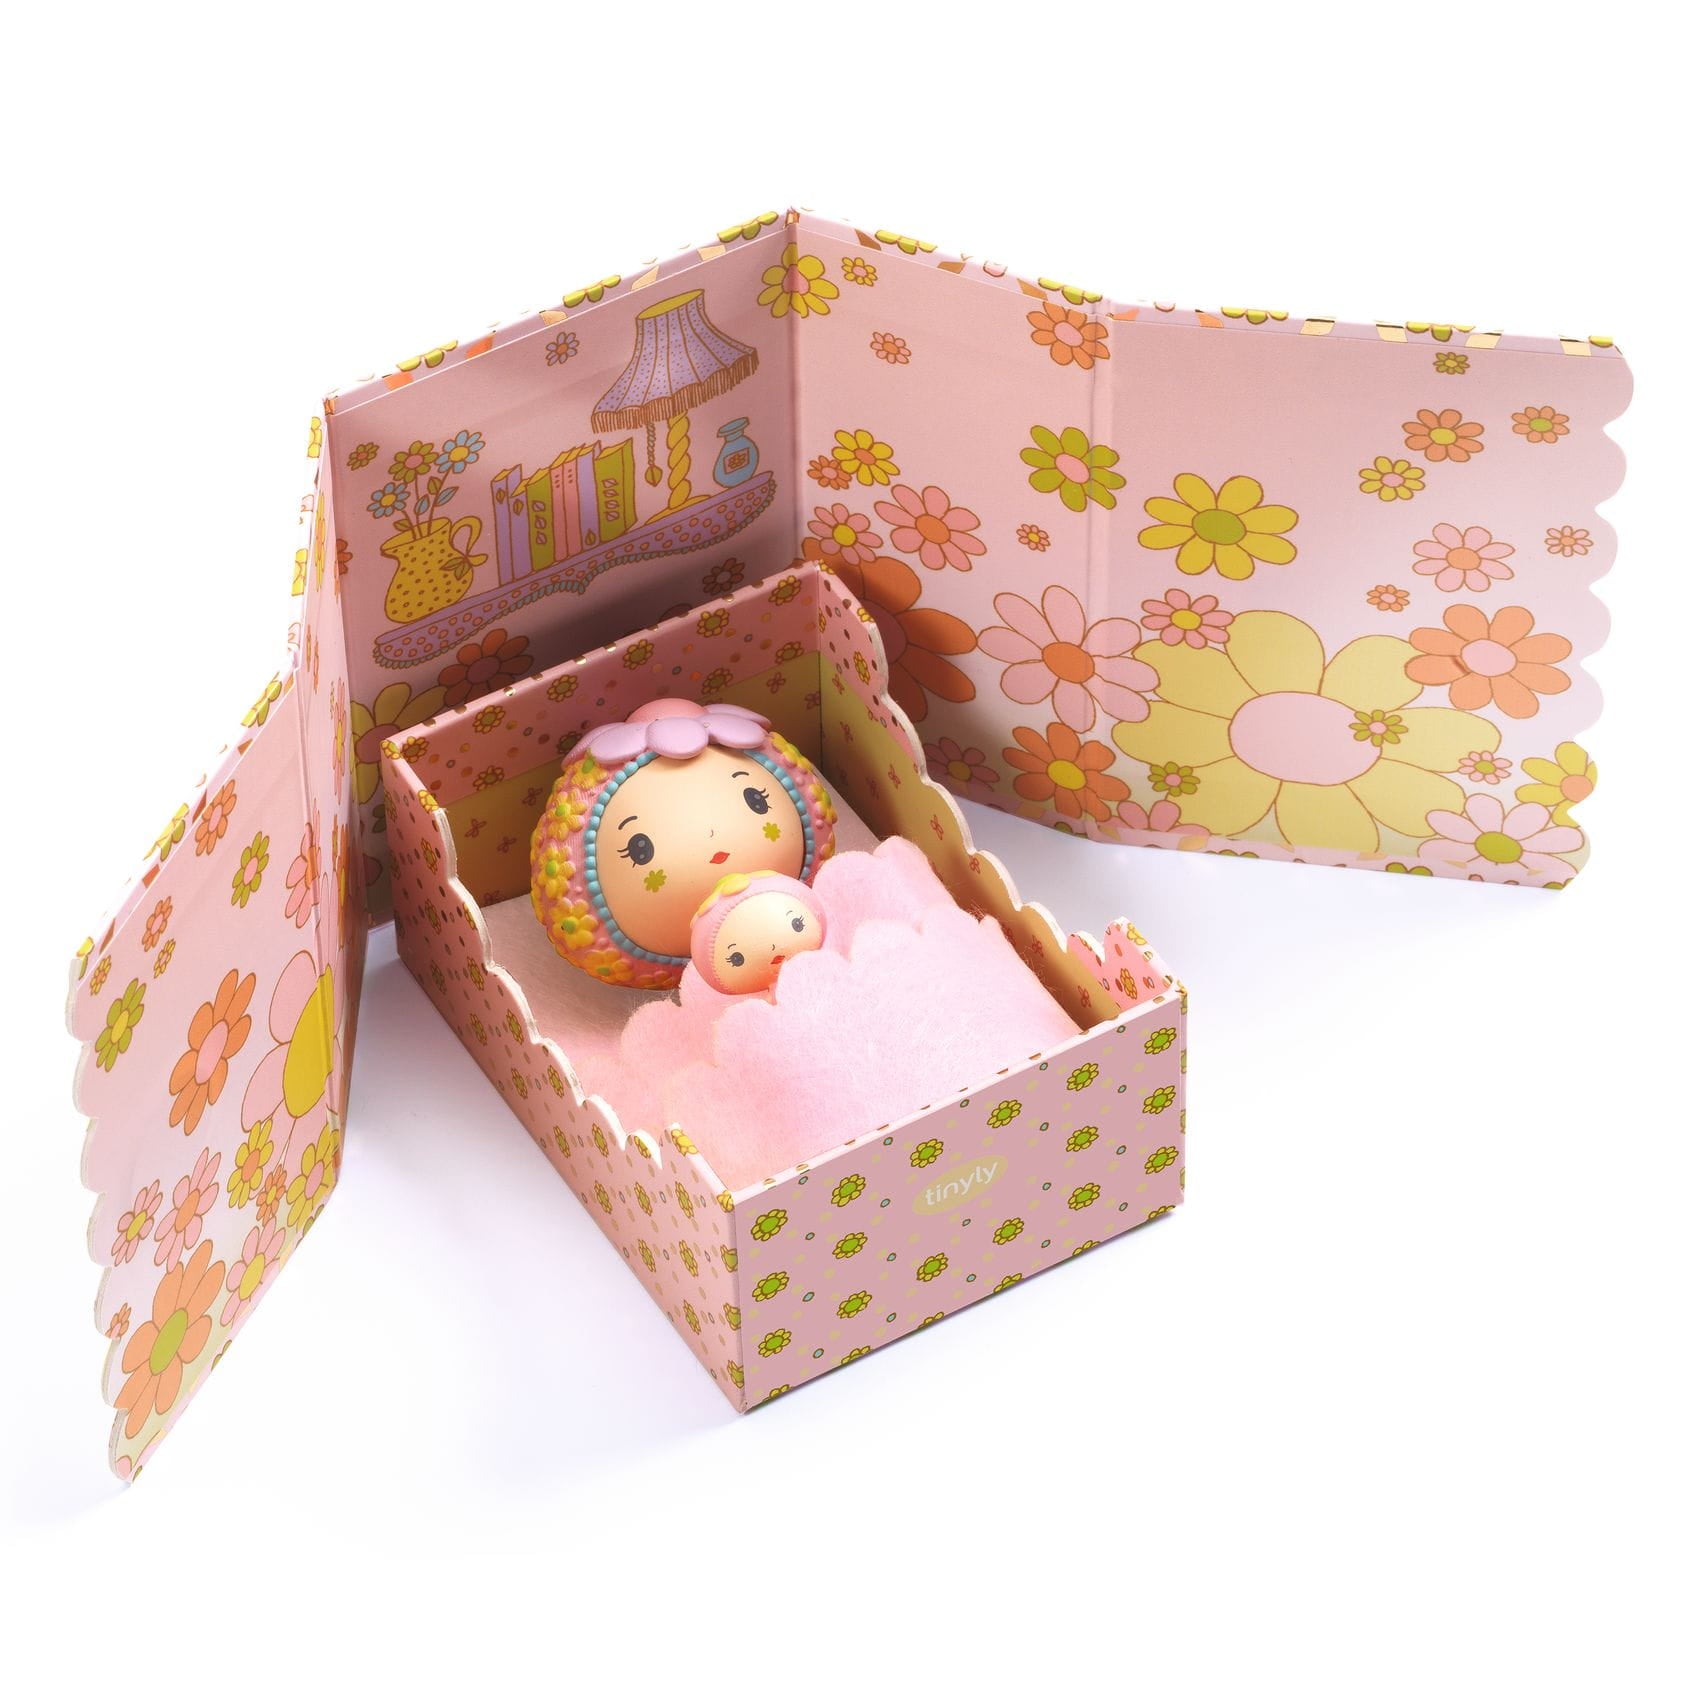 Djeco: Room in the magnetic box of Rose Tinyly Room